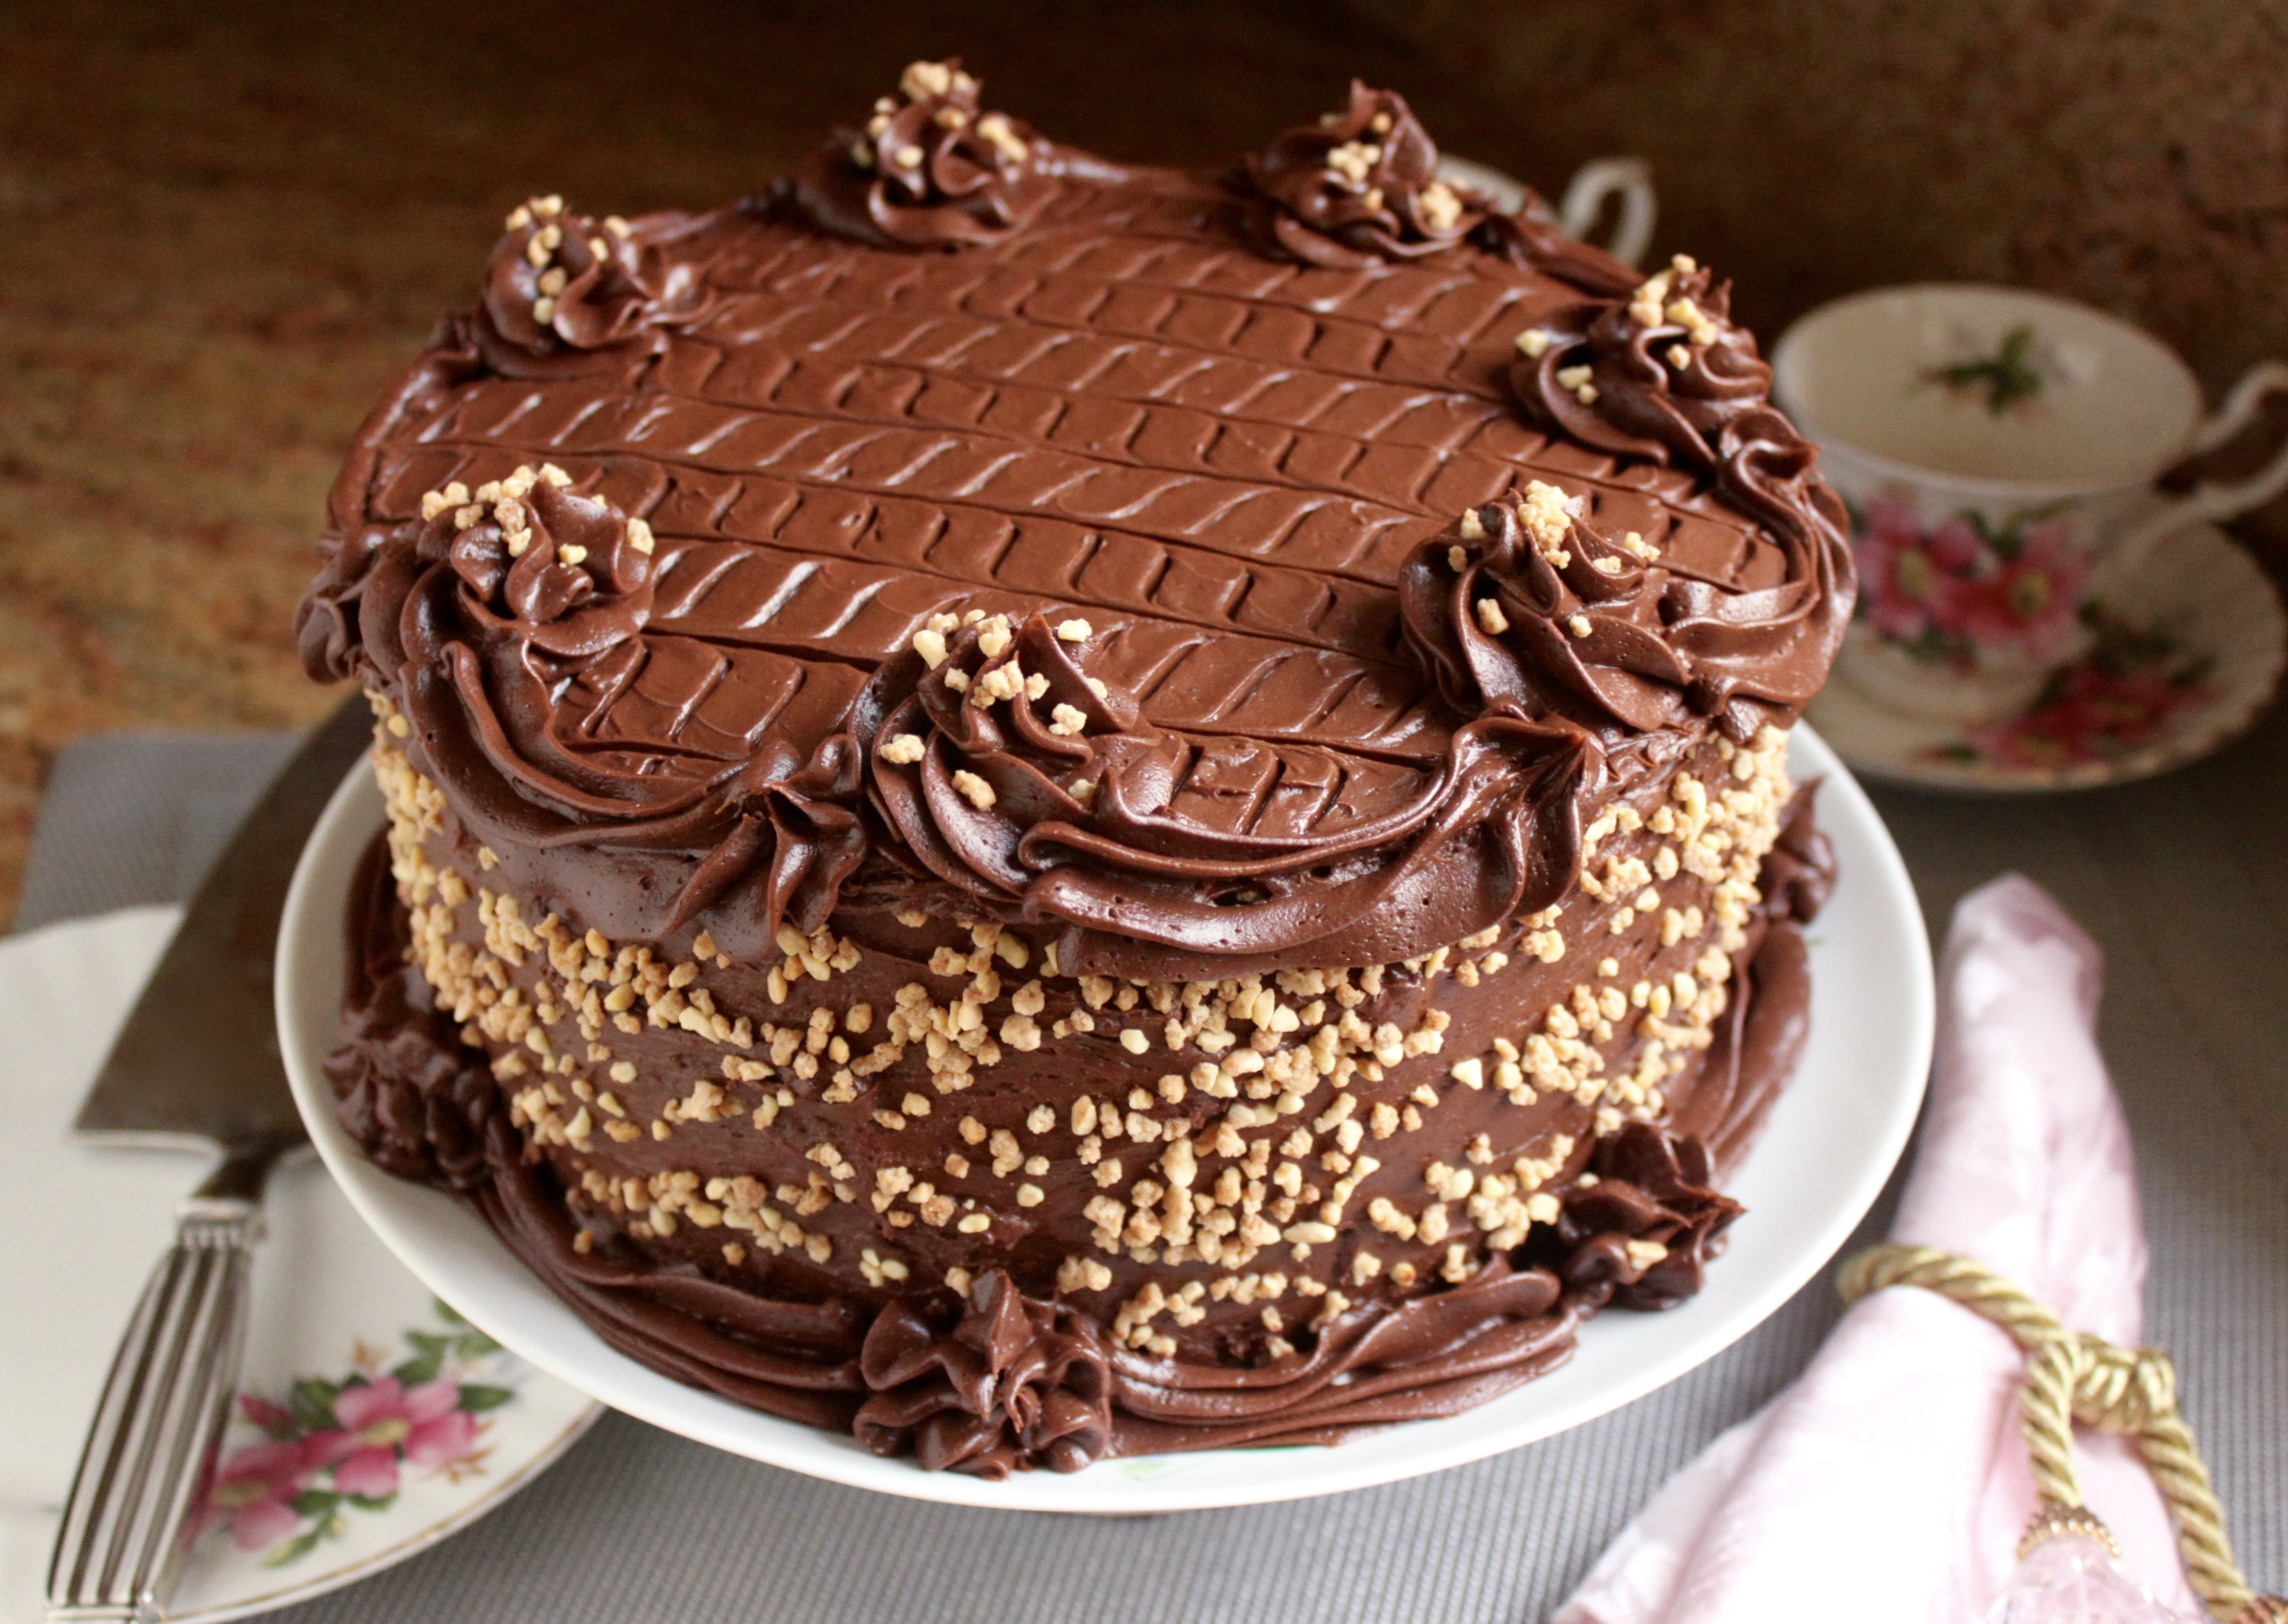 Best Chocolate Cake The Very Best Most Delicious and Moist Chocolate Cake You